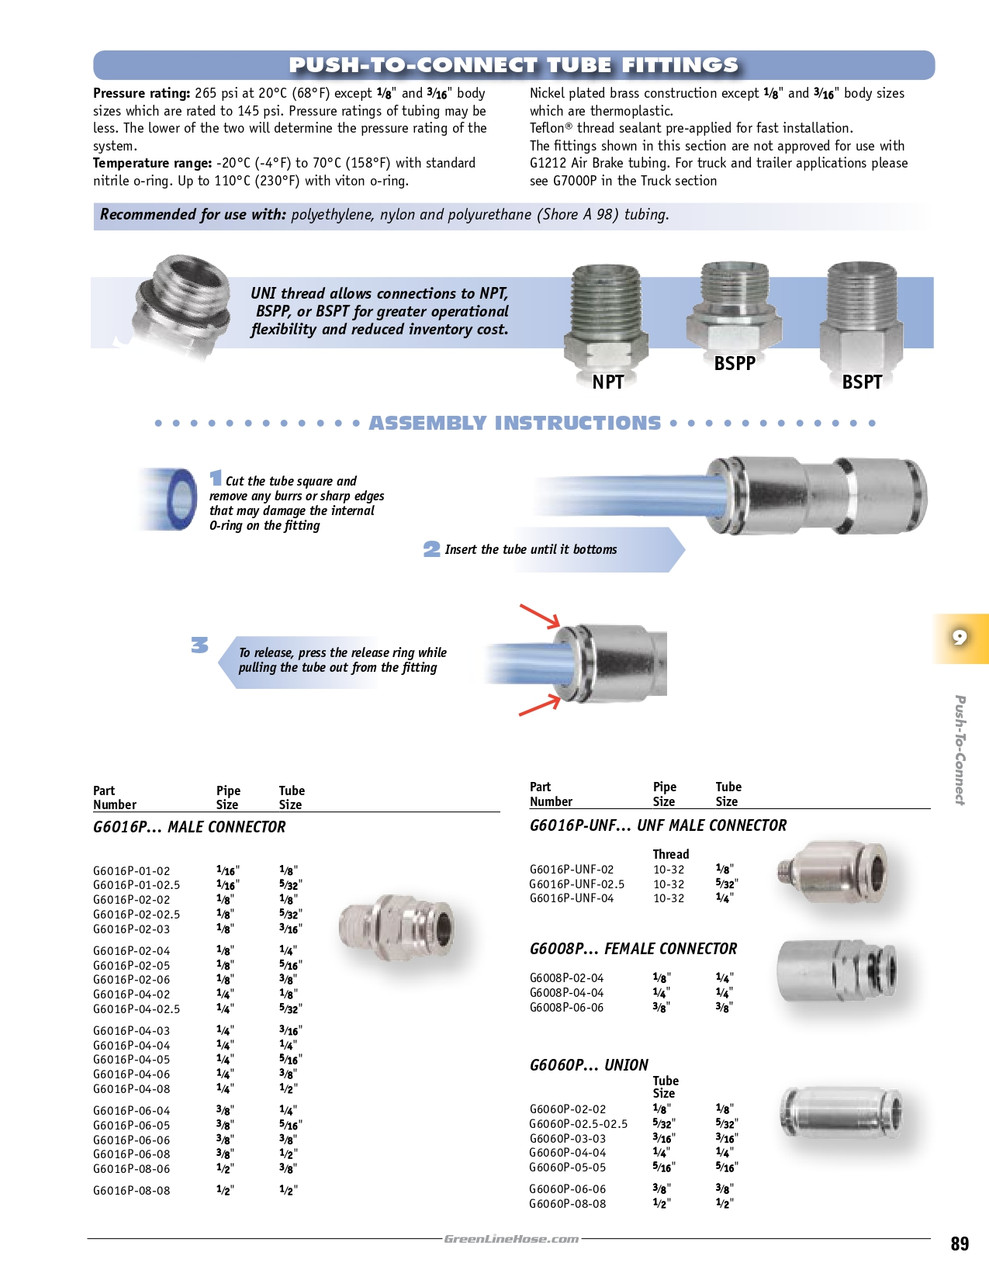 10-32 x 1/8" Nickel Plated Brass Male Thread - Push-To-Connect Connector   G6016P-UNF-02